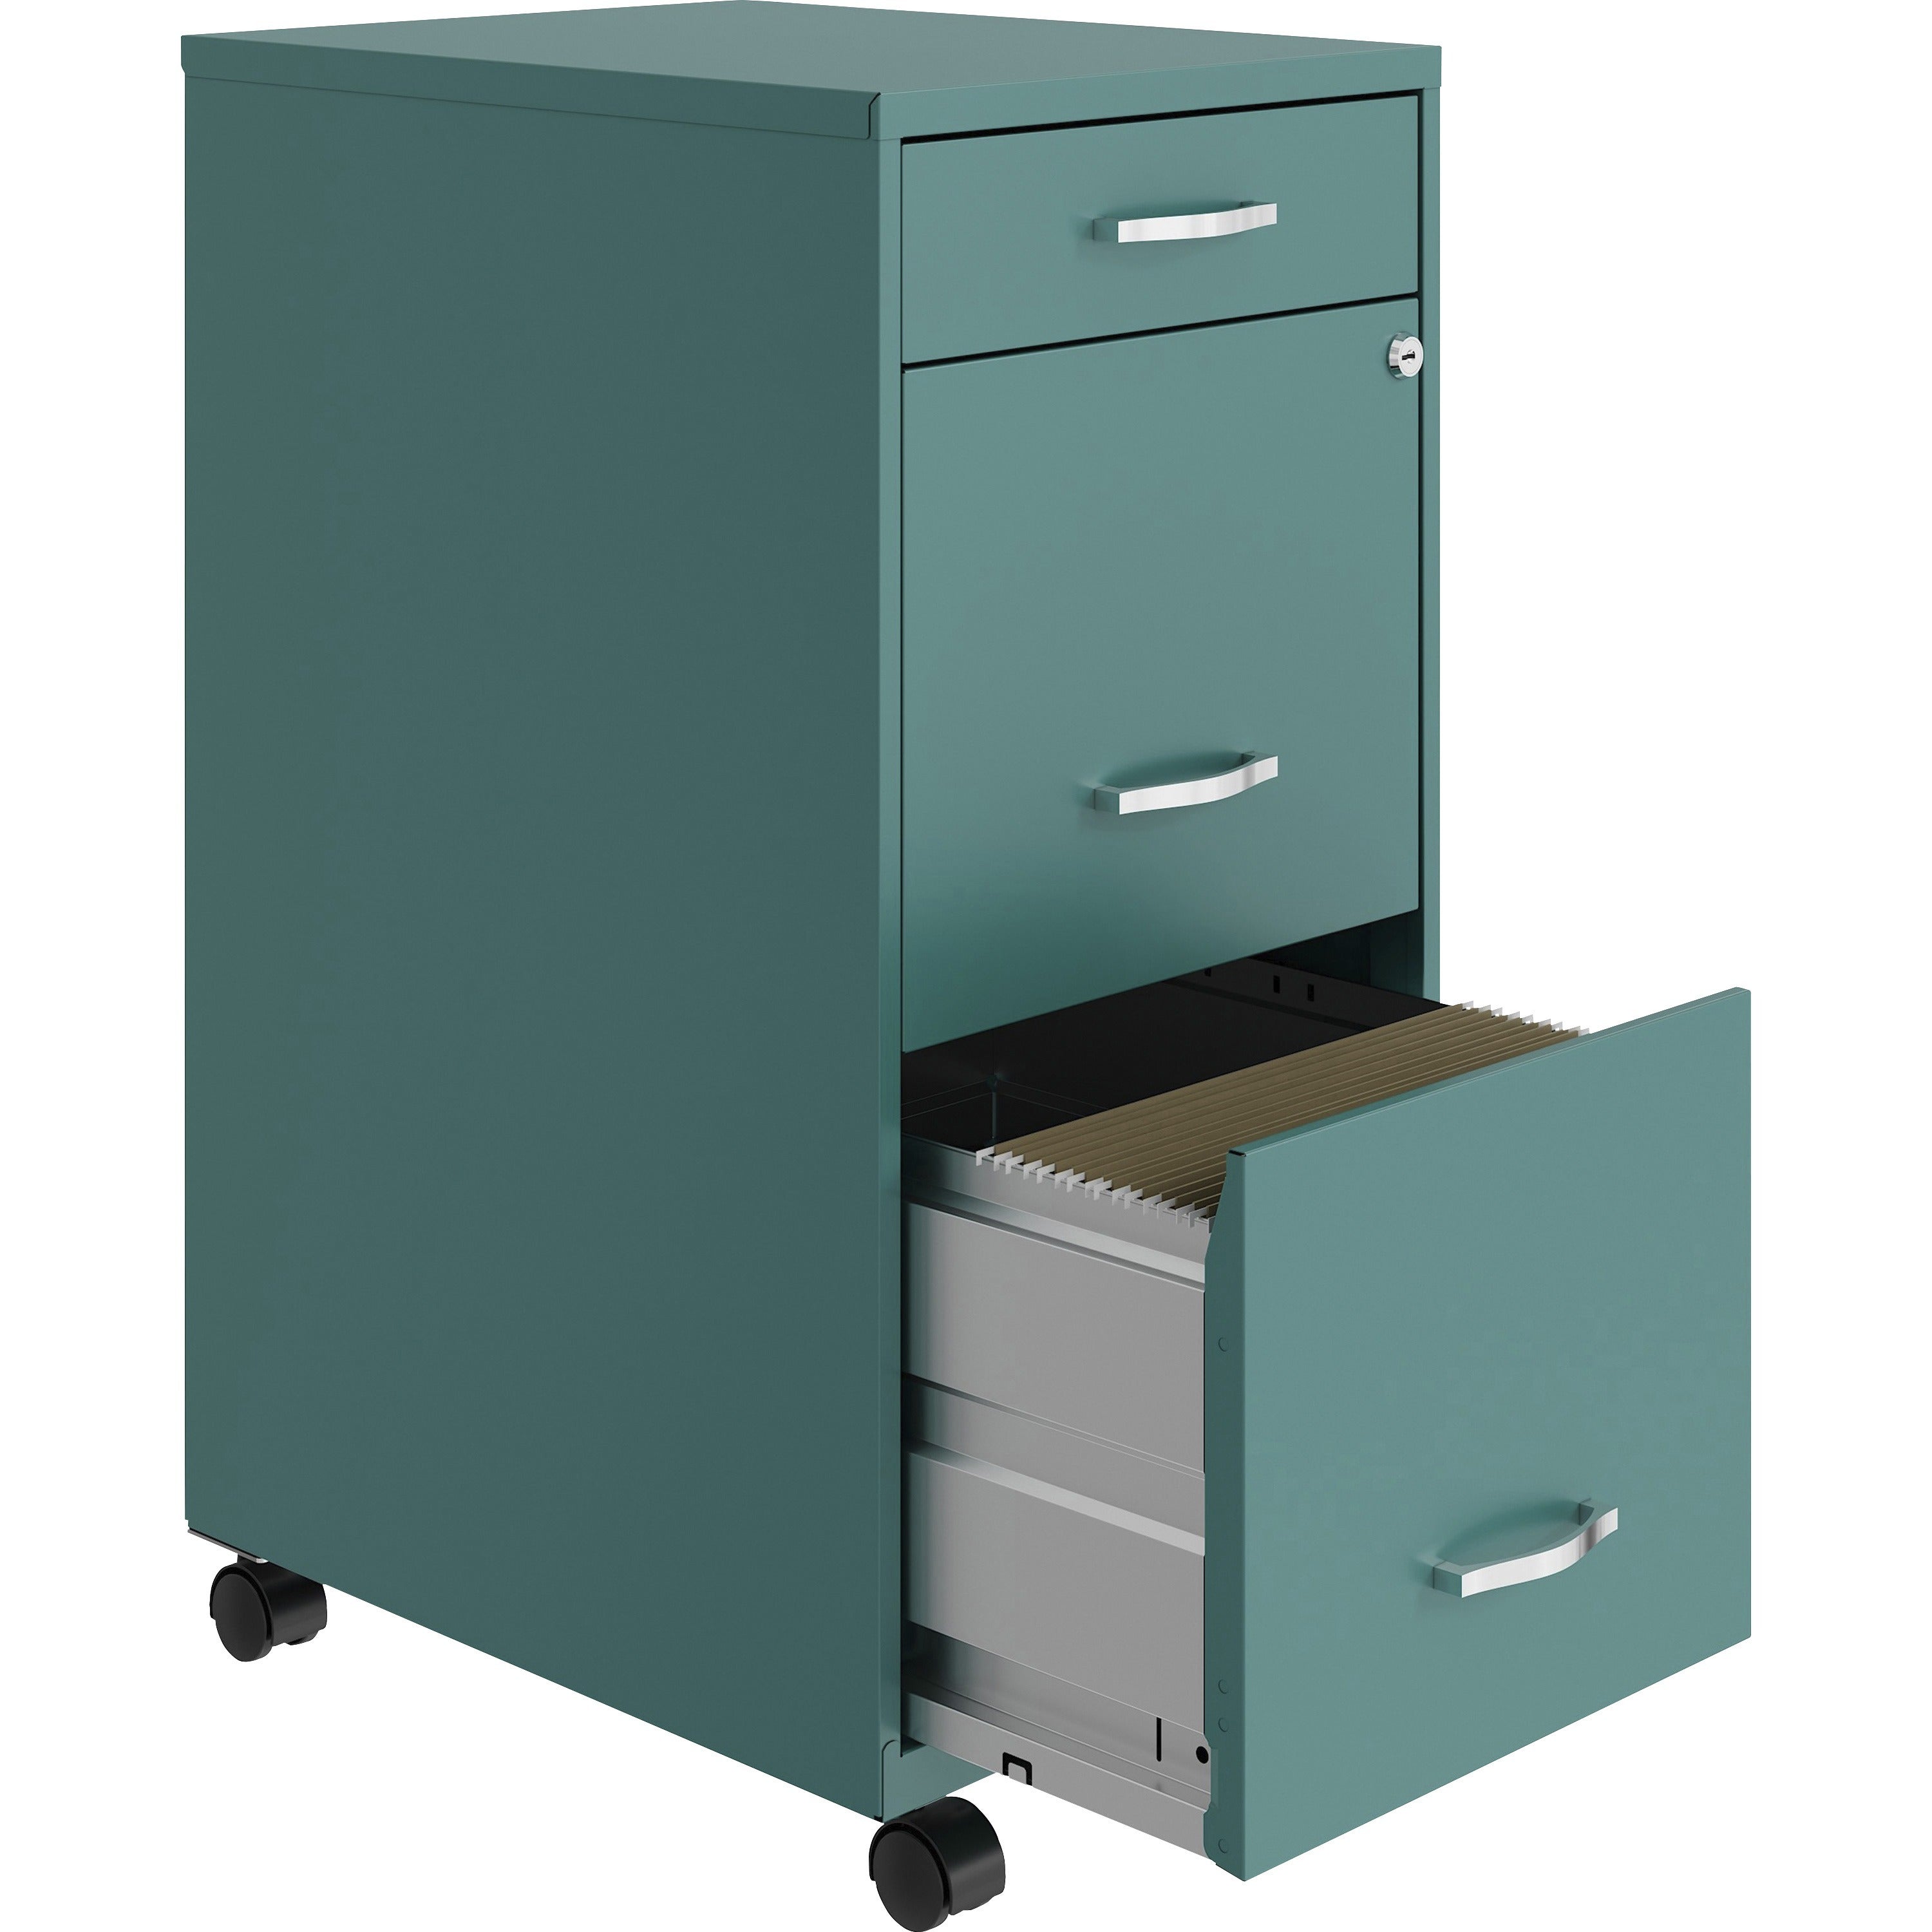 nusparc-mobile-file-cabinet-142-x-18-x-295-3-x-drawers-for-file-box-letter-mobility-locking-drawer-glide-suspension-3-4-drawer-extension-cam-lock-nonporous-surface-teal-painted-steel-recycled_nprvf318bmtl - 4